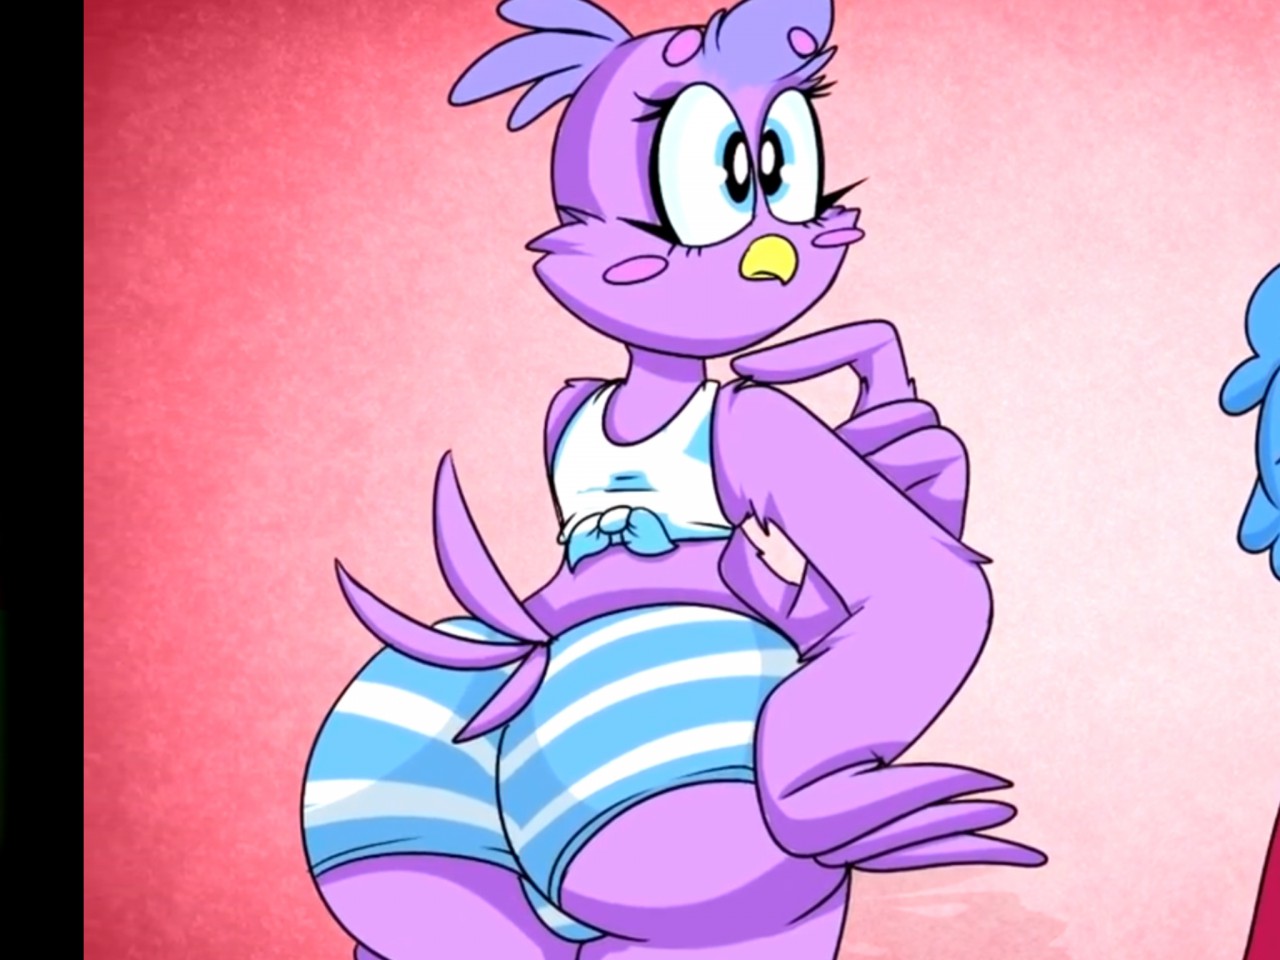 Also Melissa from Planet Dolan.